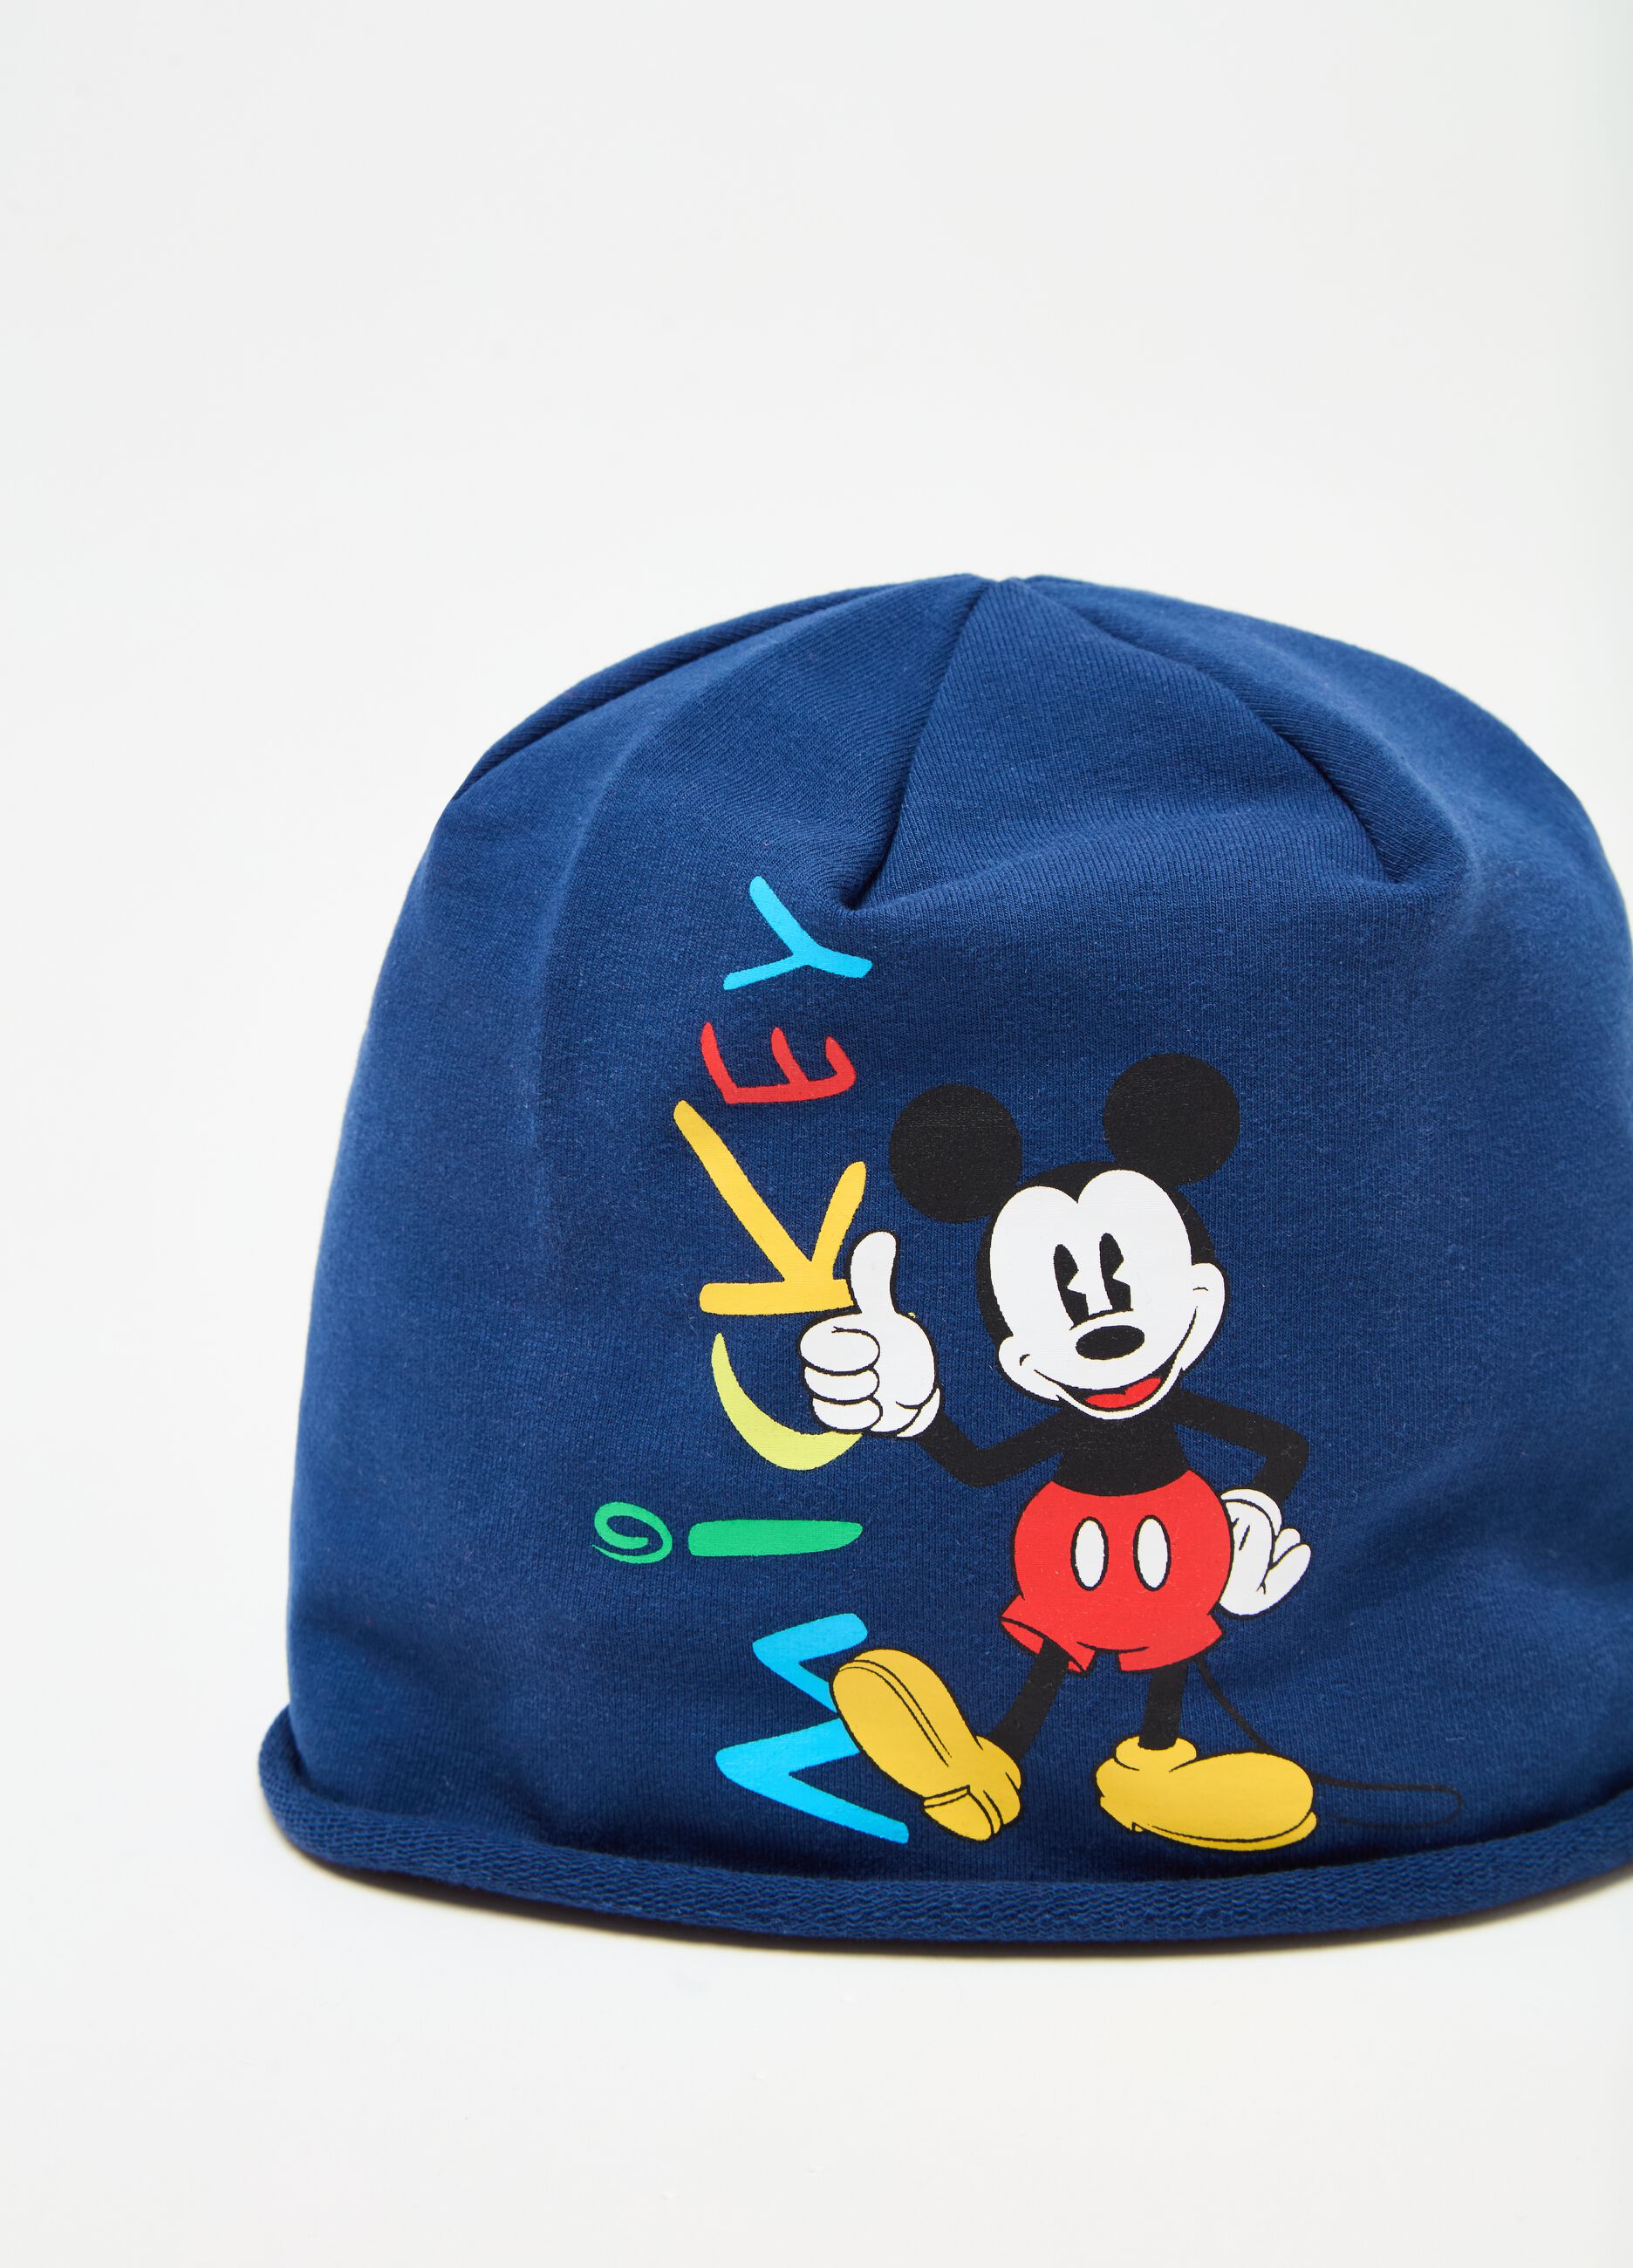 Organic cotton hat with Mickey Mouse print